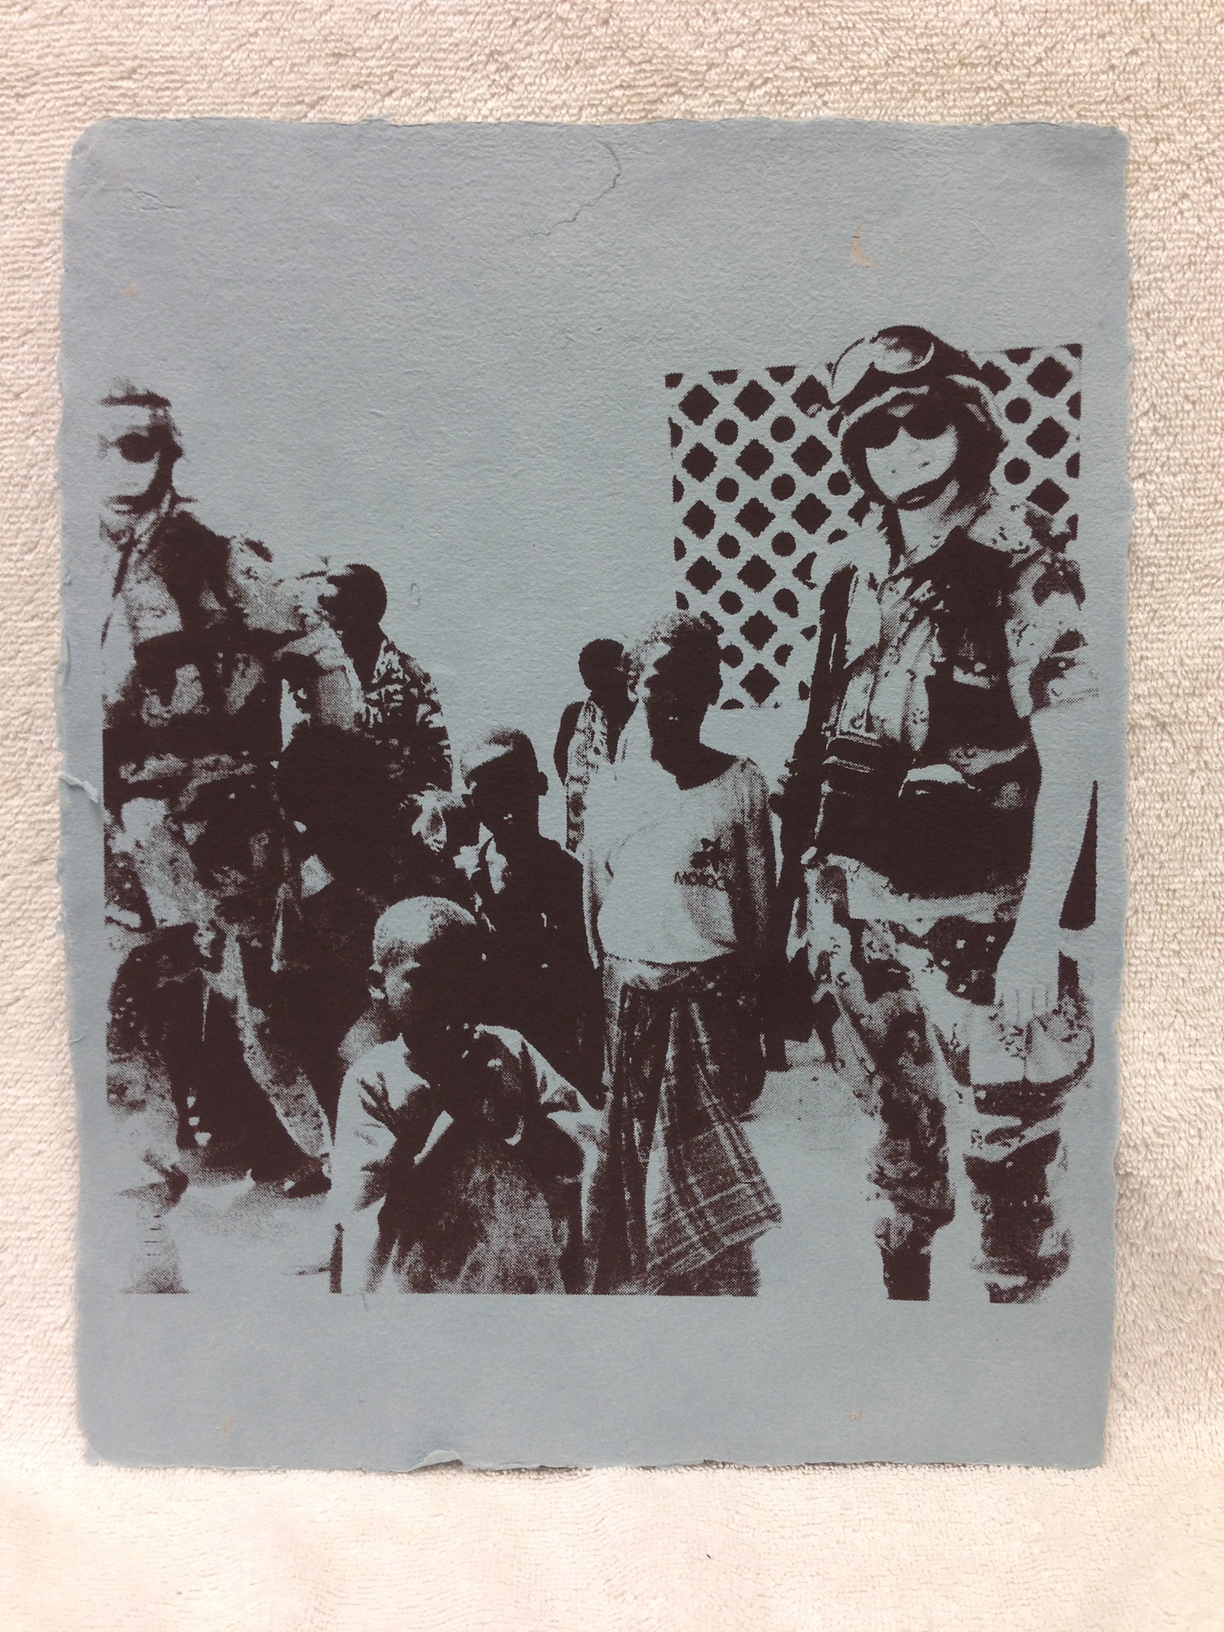 Sarah Mess Army - Somalia _The Only Peace-keeping I Ever Did_ 2012 Silkscreen on Handmade Paper from military uniforms 14 x 11 PCNJ Weekly Workshop IMG_1018.jpg